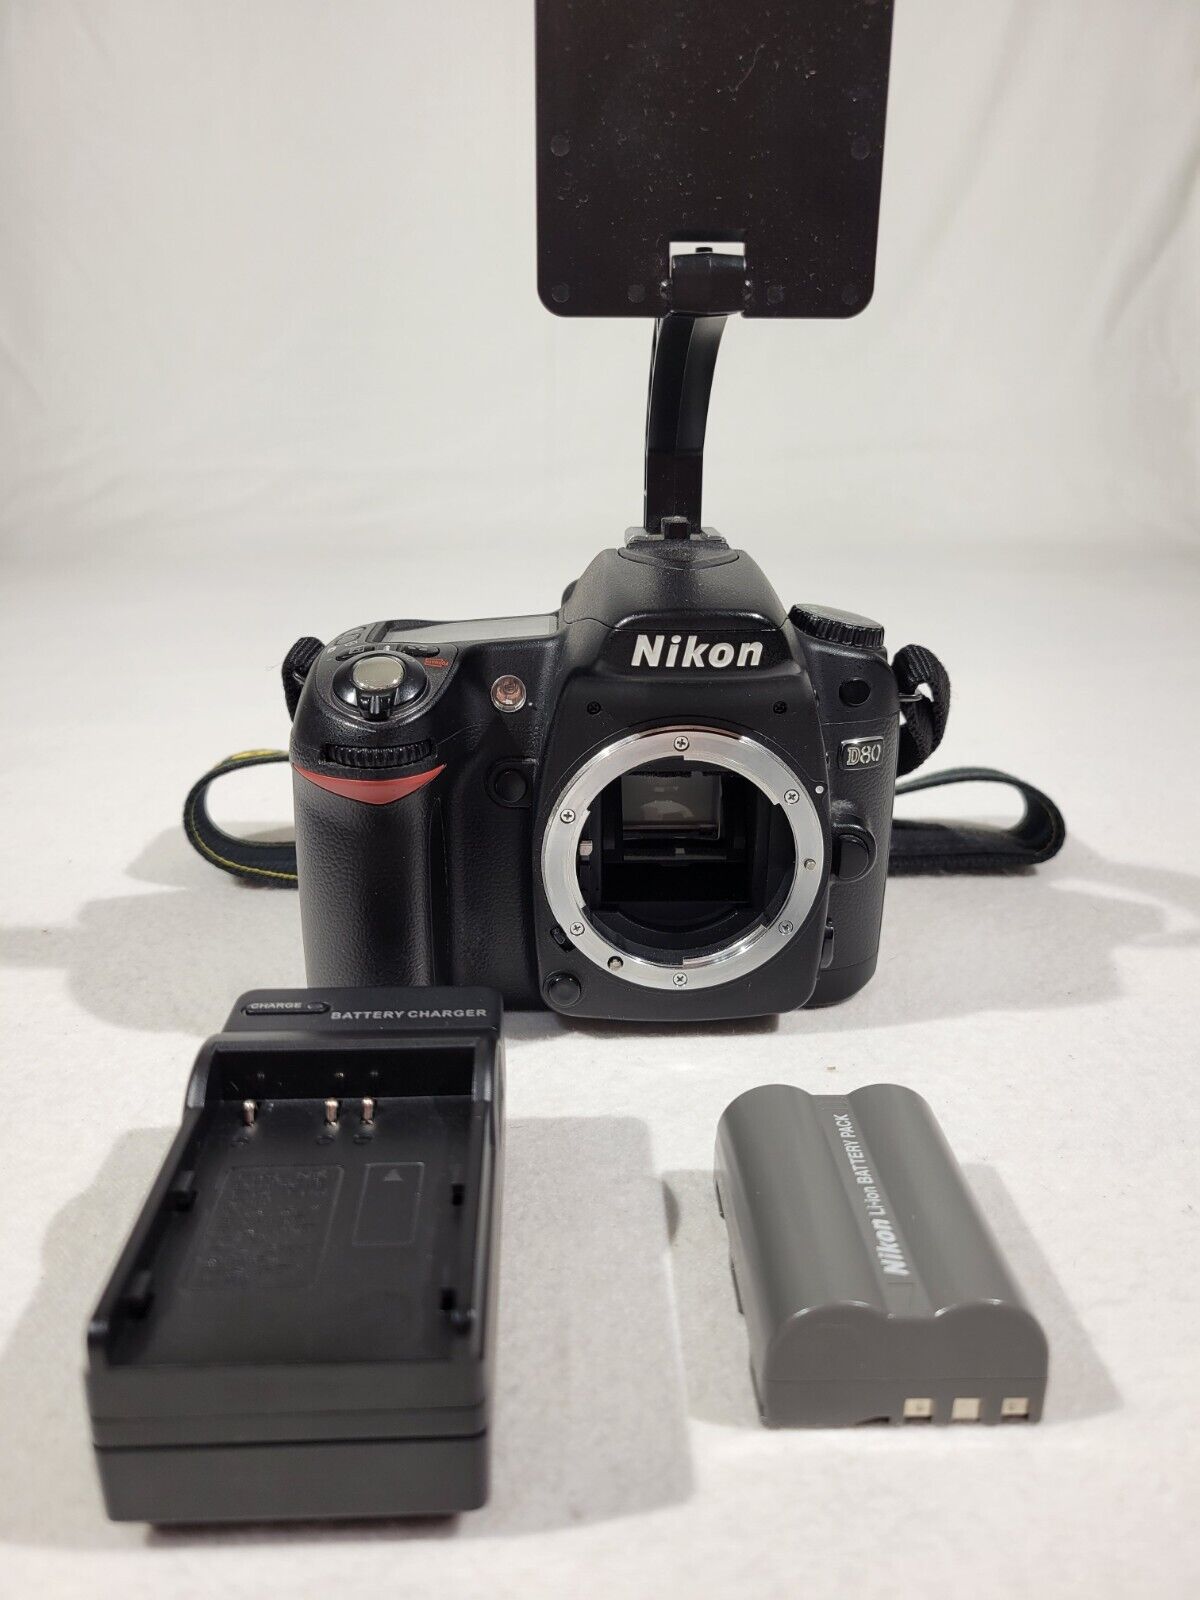 Near Mint Nikon D80 Digital SLR Camera Body Battery & Charger Tested Working